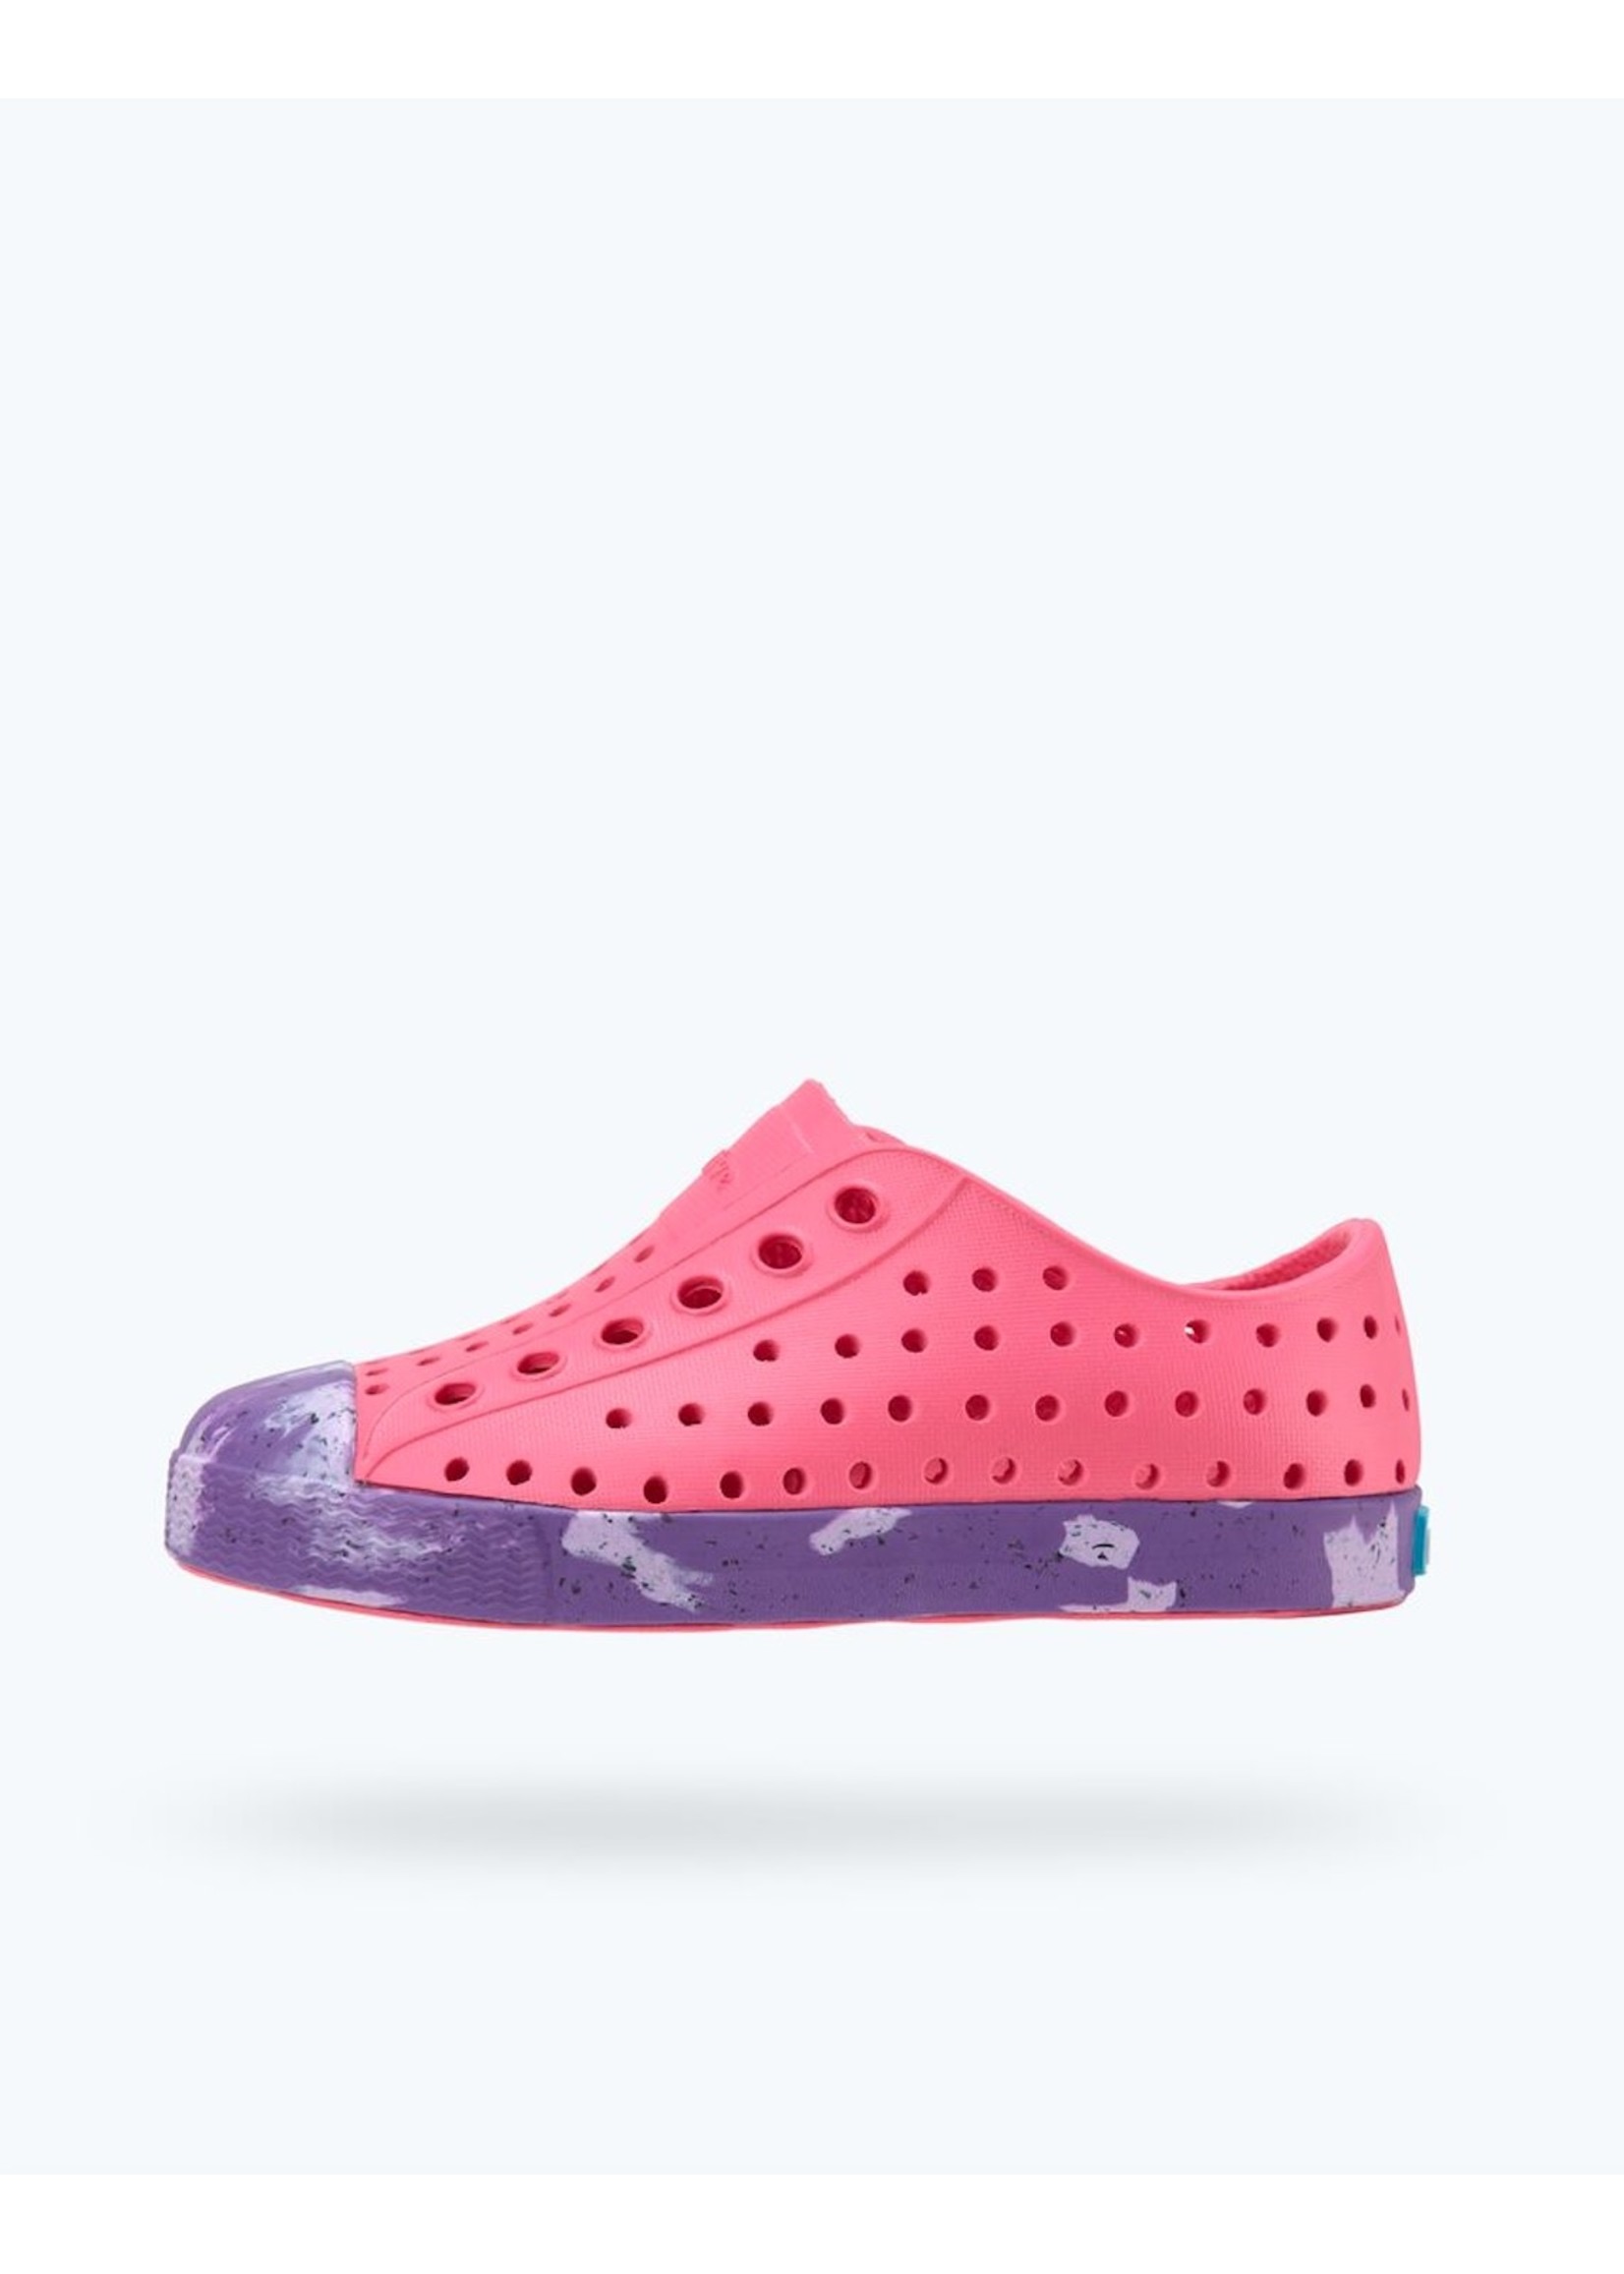 Native Shoes Native Shoes Jefferson Marbled Youth / Junior in Hollywood Pink/ Starfish Lavender Marble